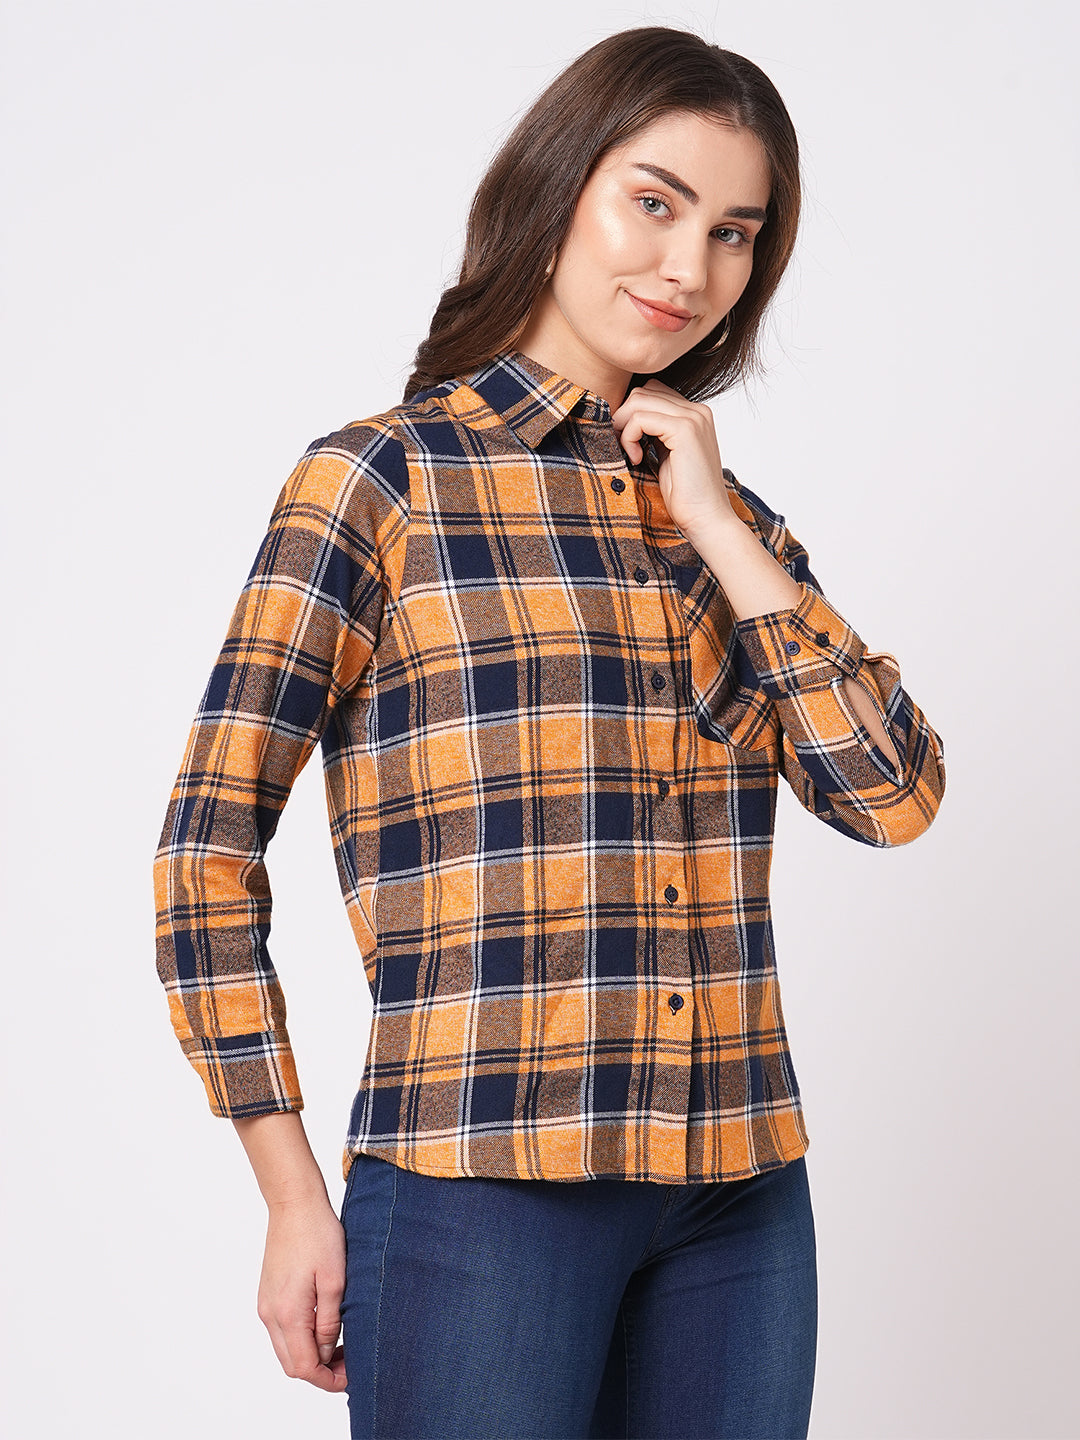 Bombay High Women's Saffron Chequered Relaxed Fit Full Sleeves Shirt